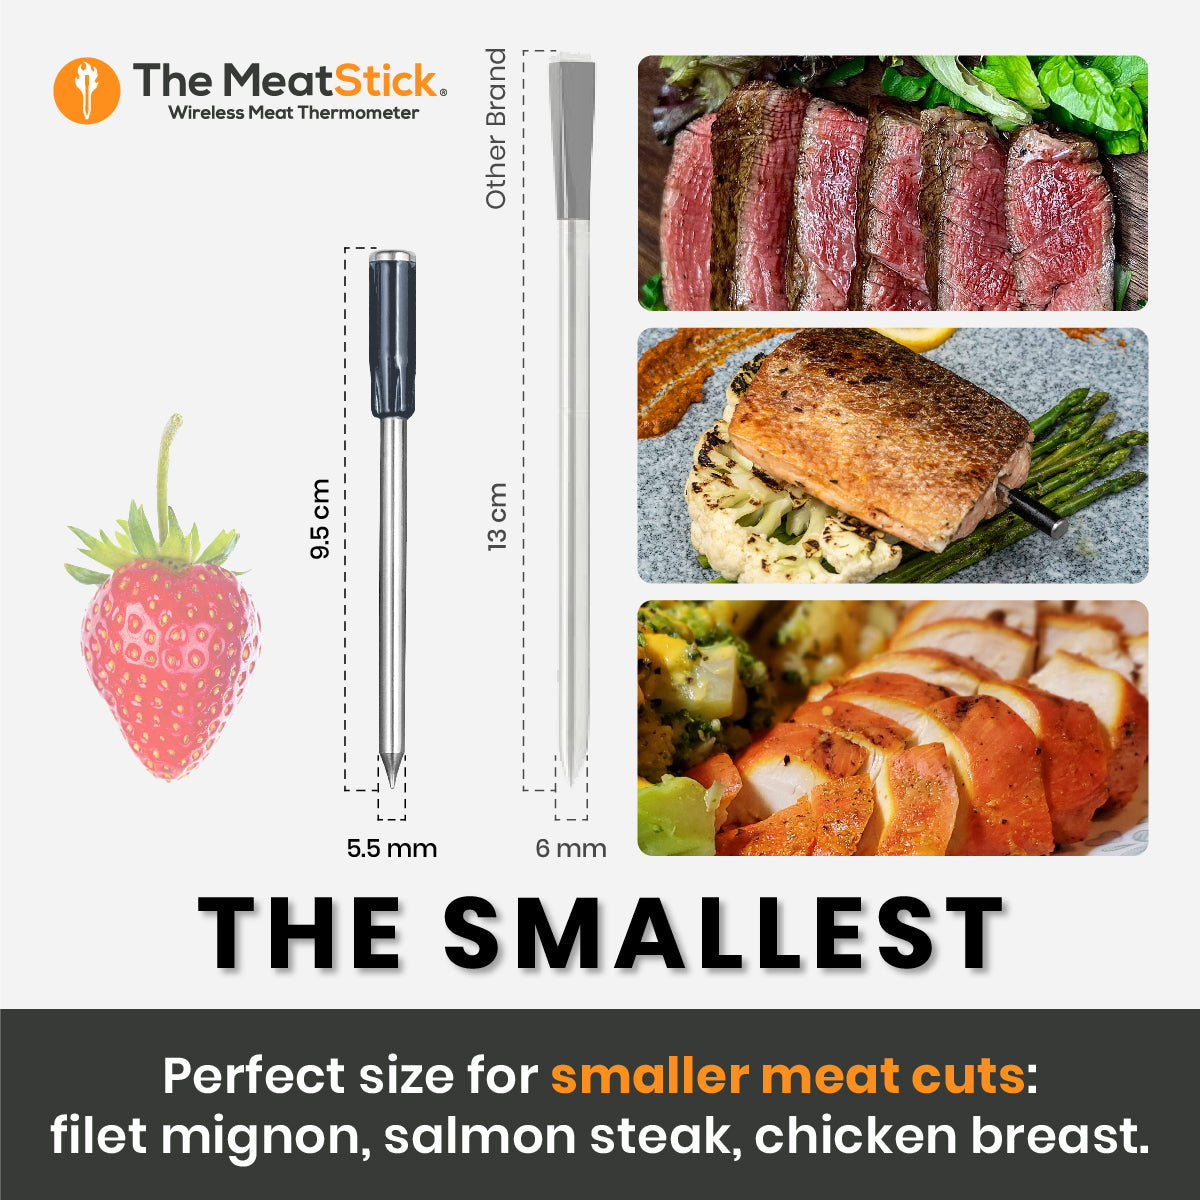 Smart Bluetooth BBQ Oven Meat Thermometer with 6 Food Grade Probes